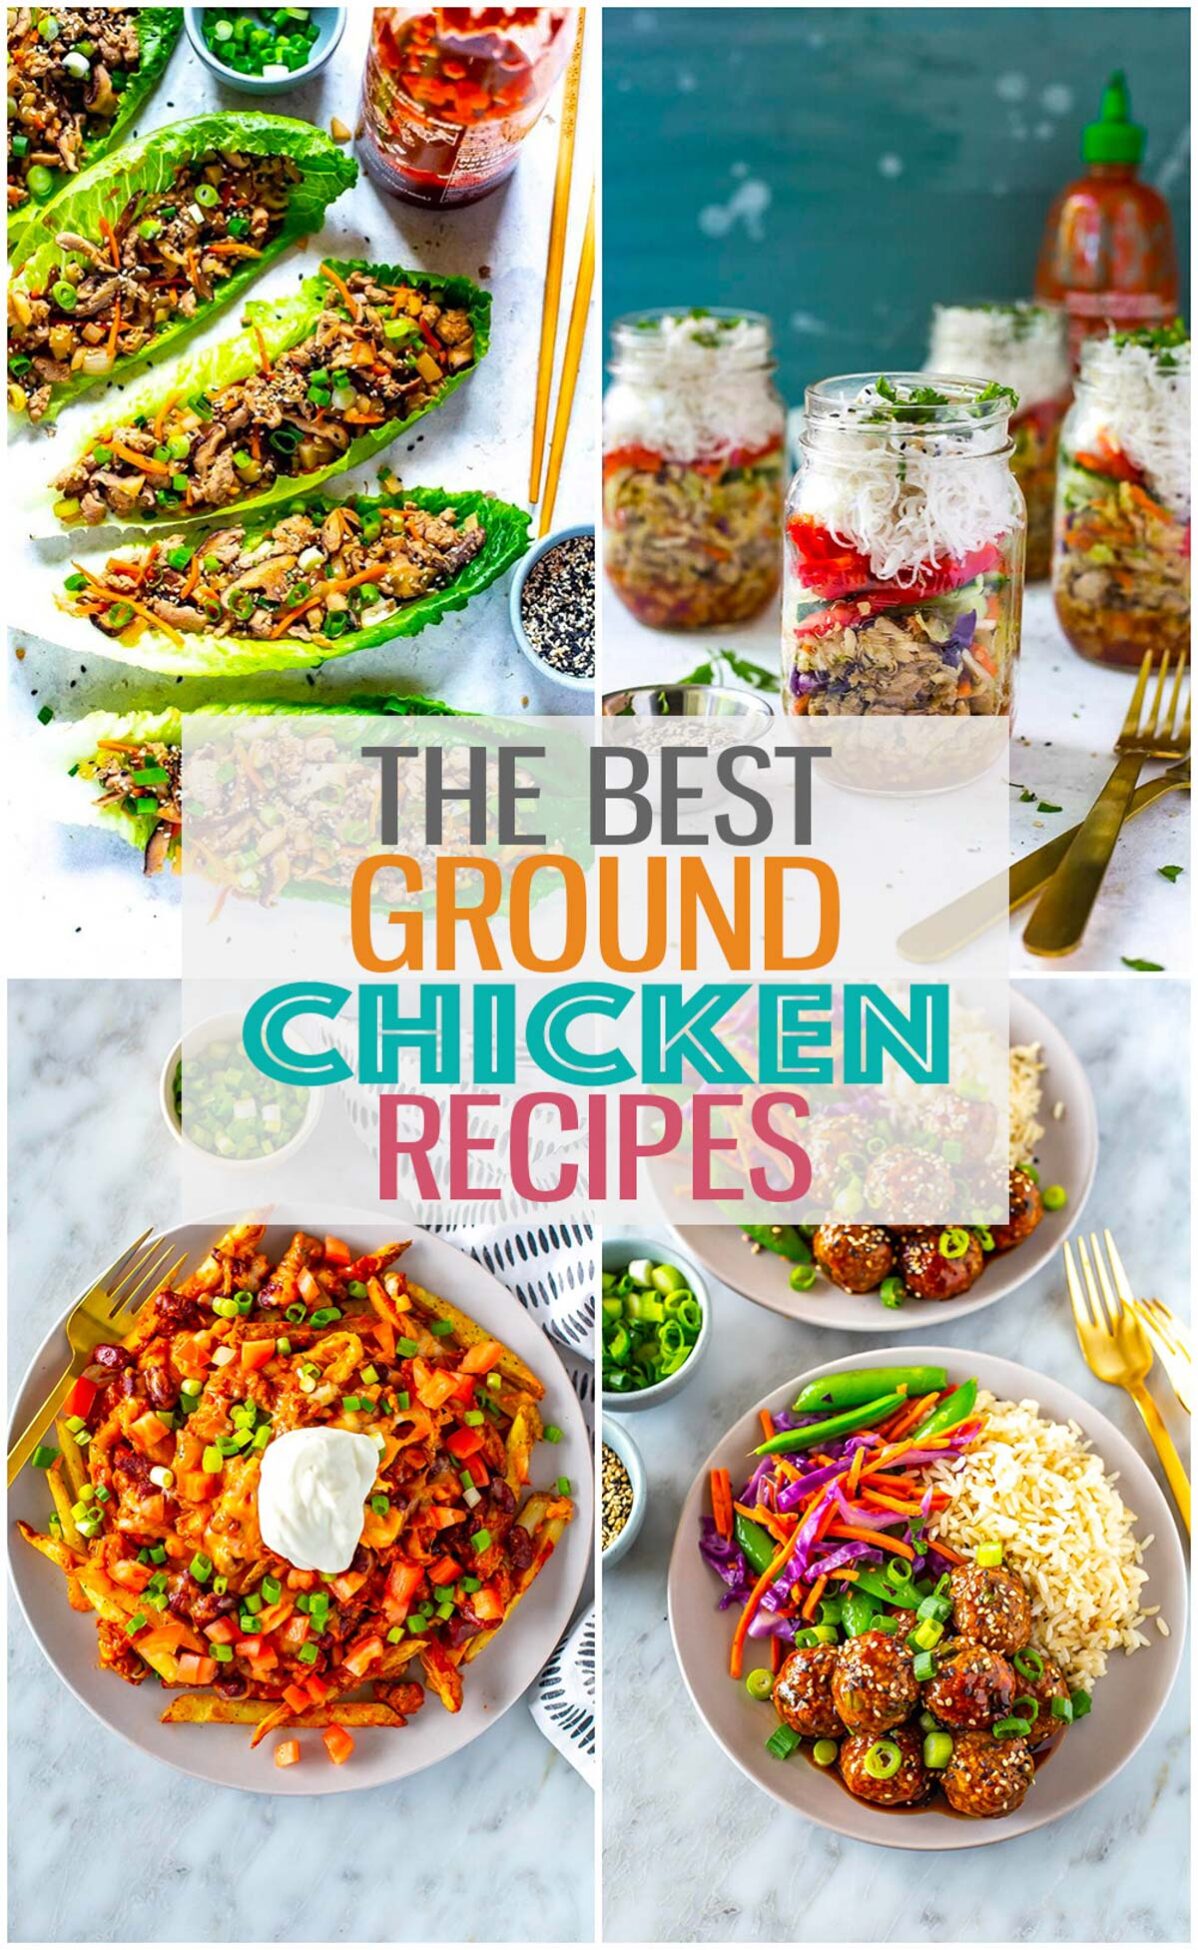 A collage of four different ground chicken recipes with the text "The Best Ground Chicken Recipes" layered over top.